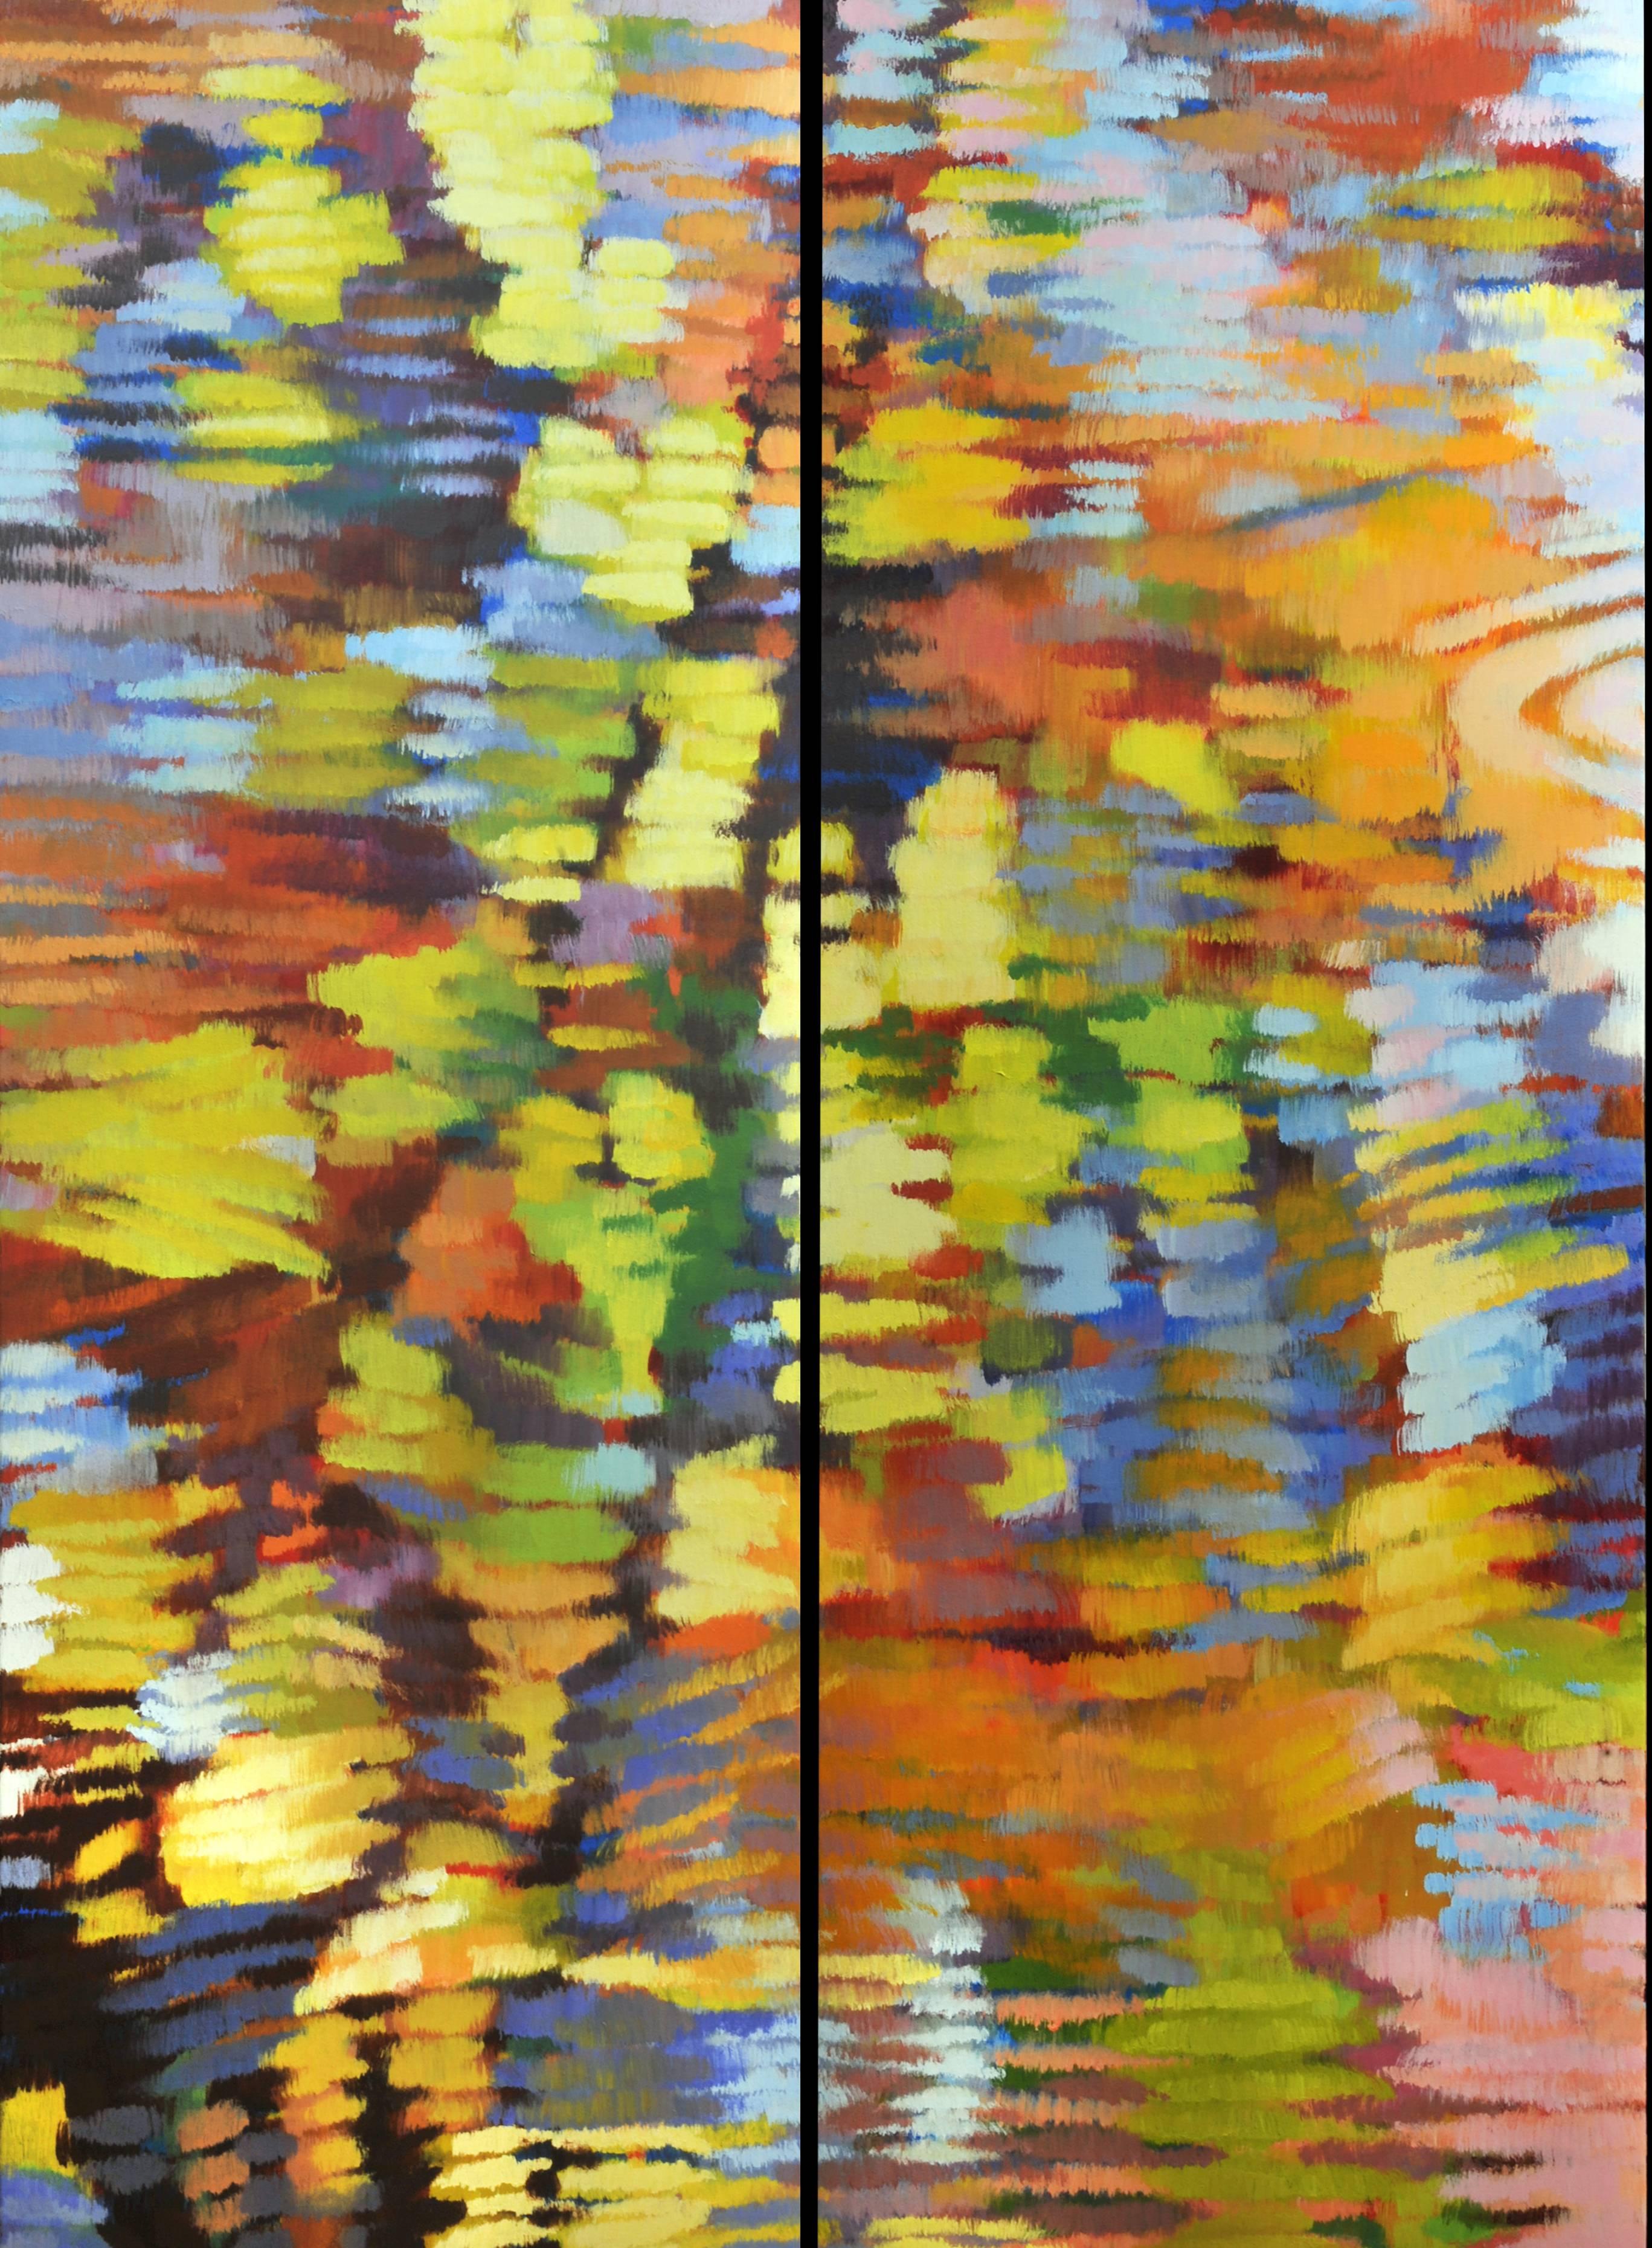 Jill Hackney Landscape Painting - "Echo 1", Pair of Impressionist Style Oil Painting on Canvas, Waterscape Diptych